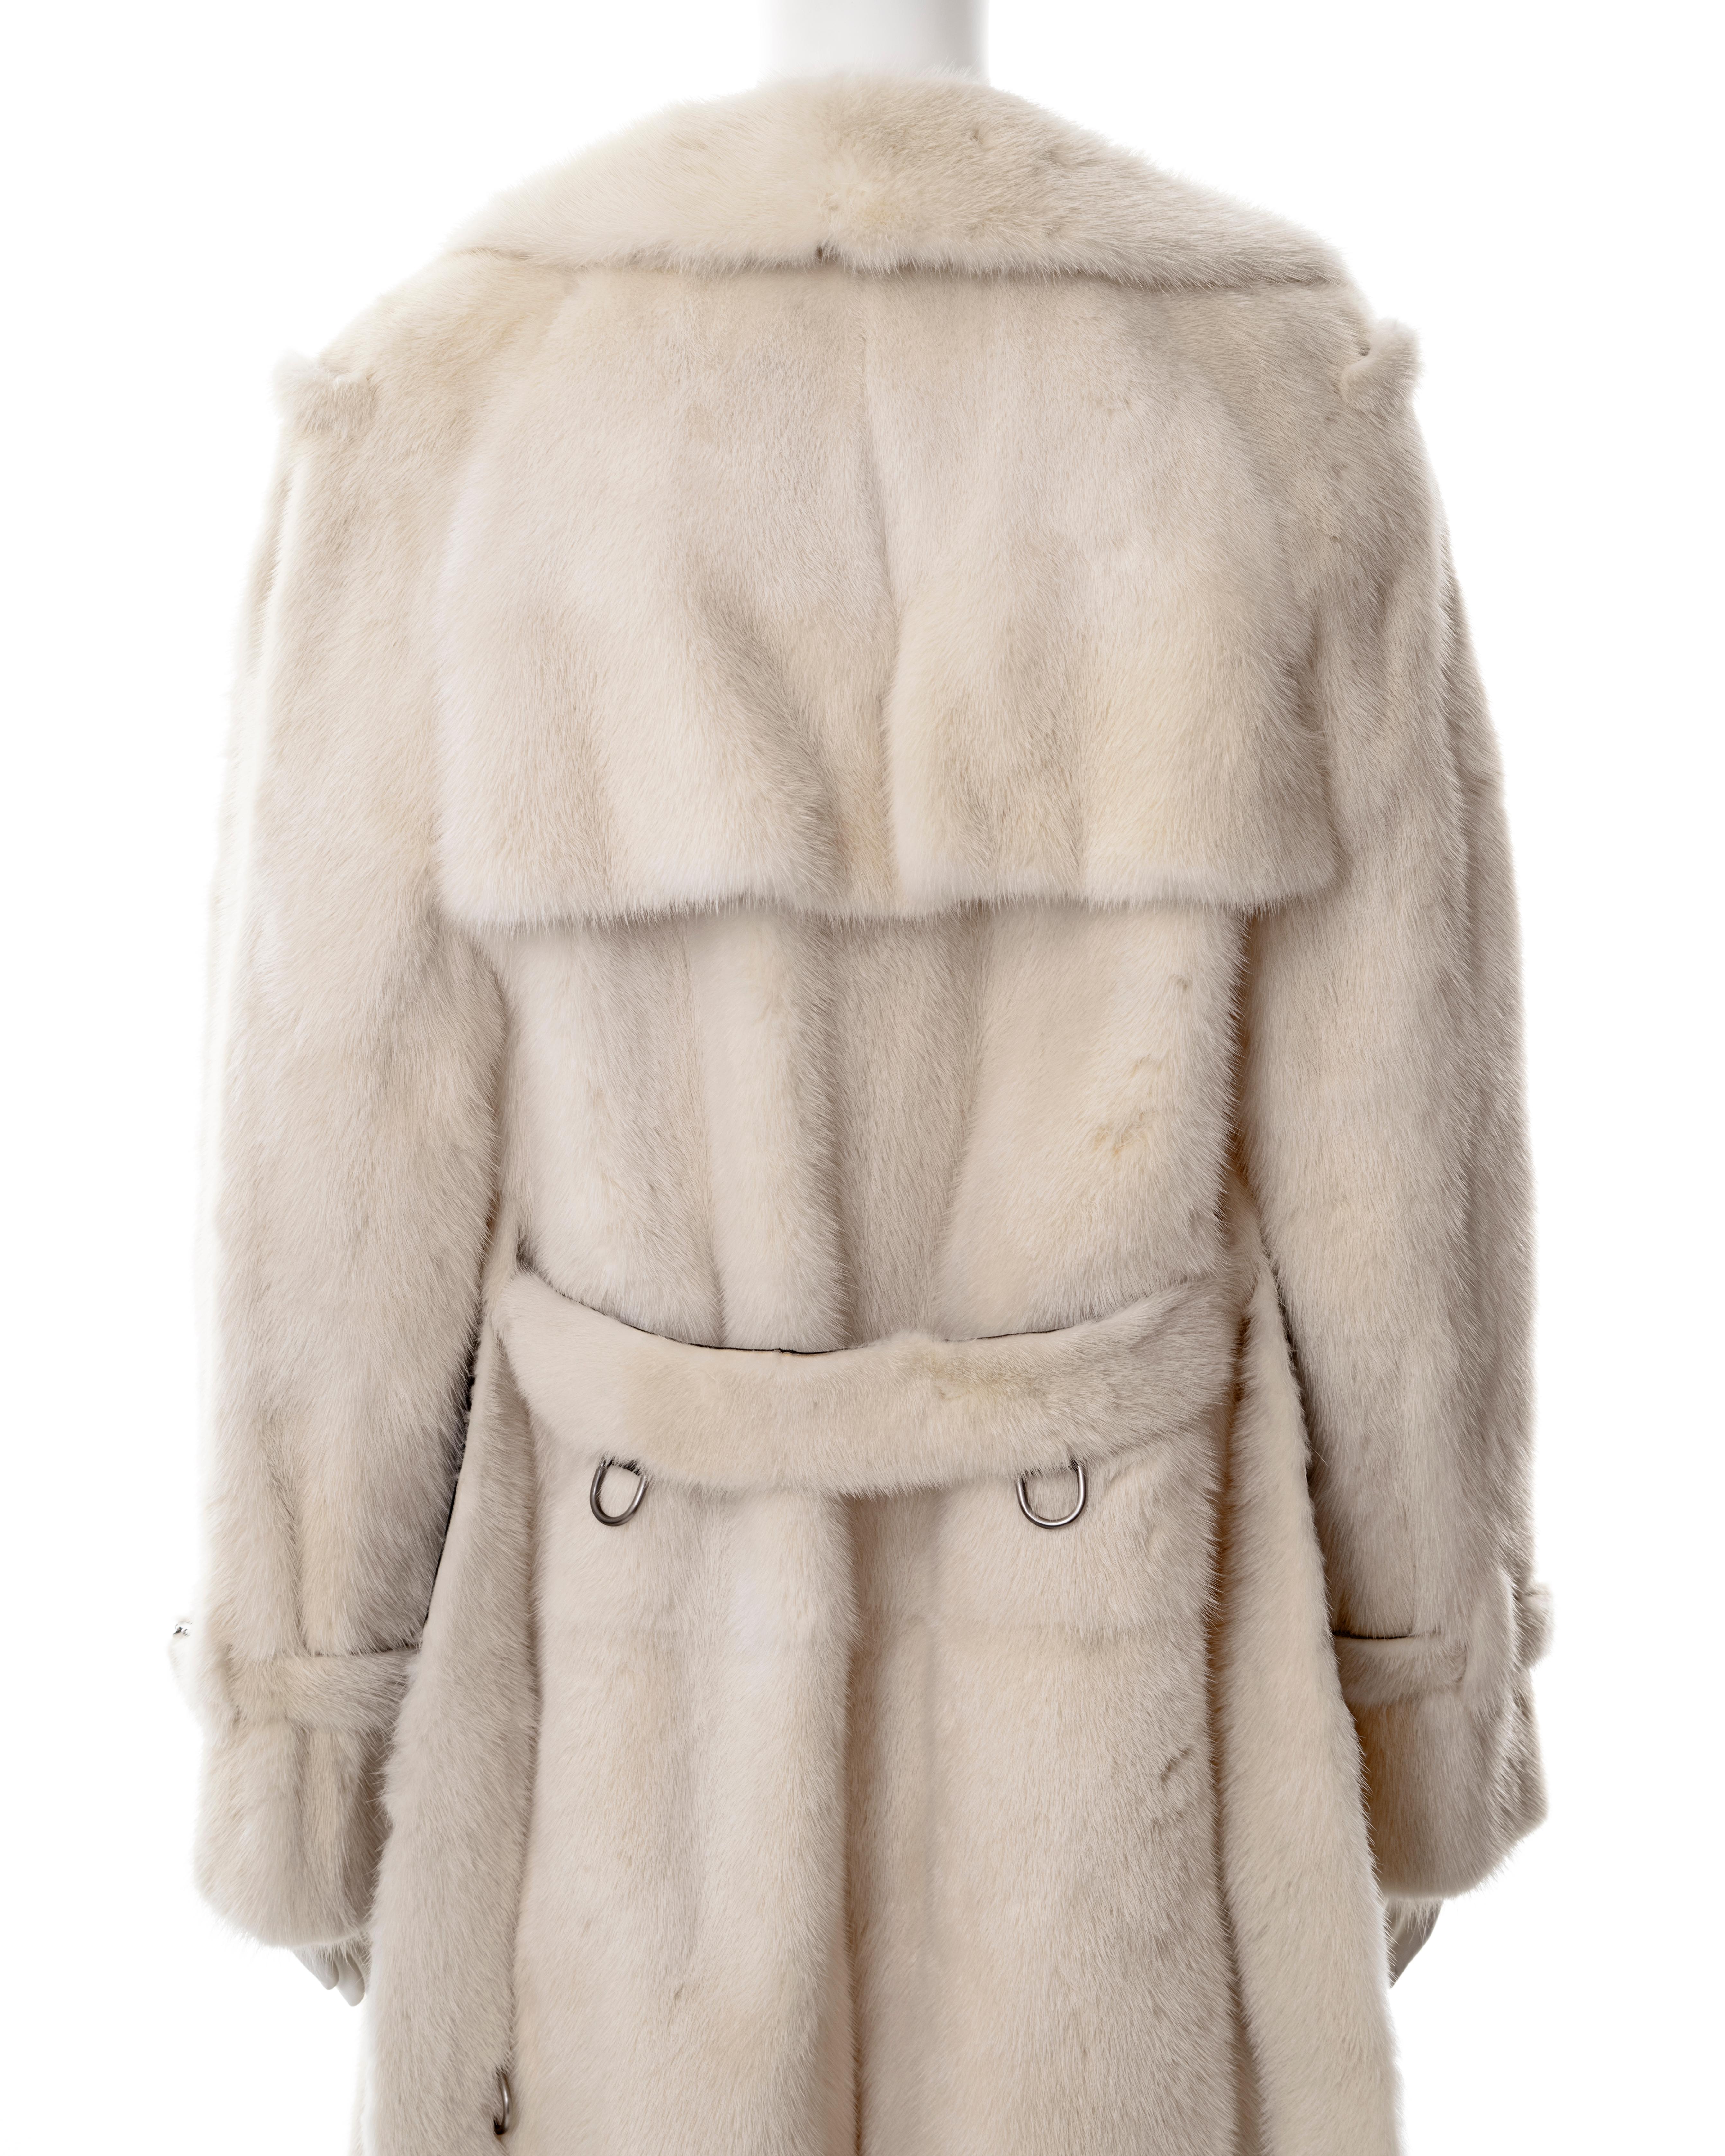 Gucci by Tom Ford white mink fur trench coat, fw 1998 For Sale 9